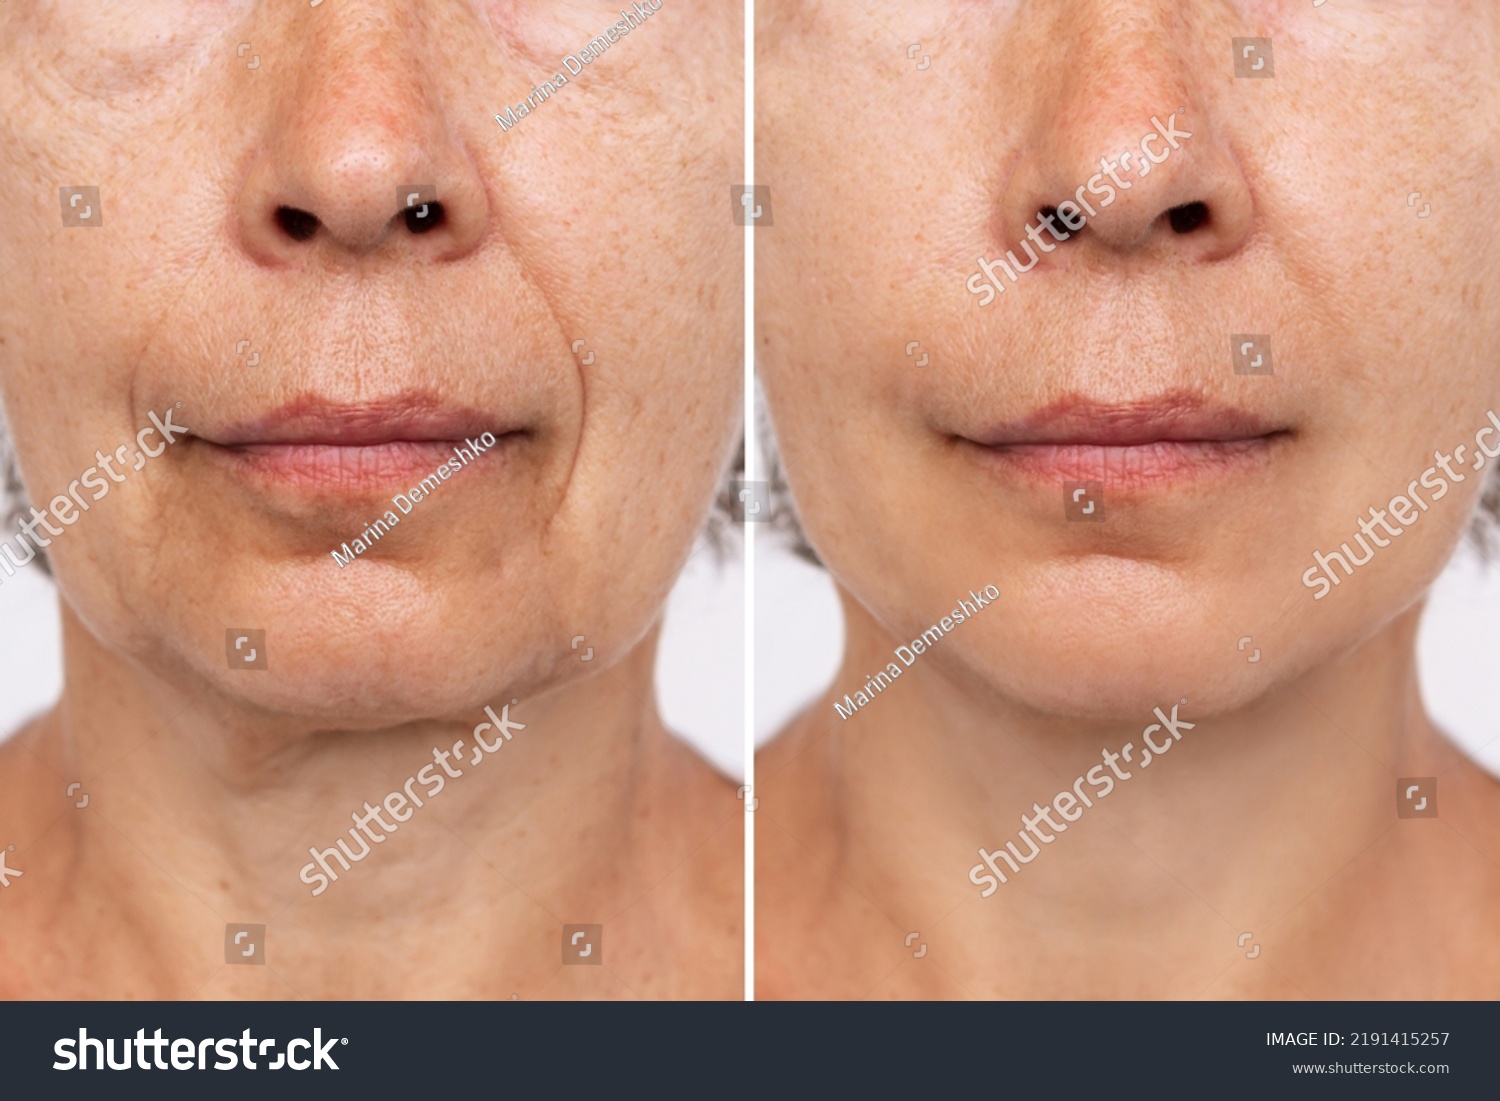 Lower part of face and neck of an elderly woman with signs of skin aging before after facelift, plastic surgery. Age-related changes, flabby sagging skin, wrinkles, creases, puffiness. Rejuvenation #2191415257